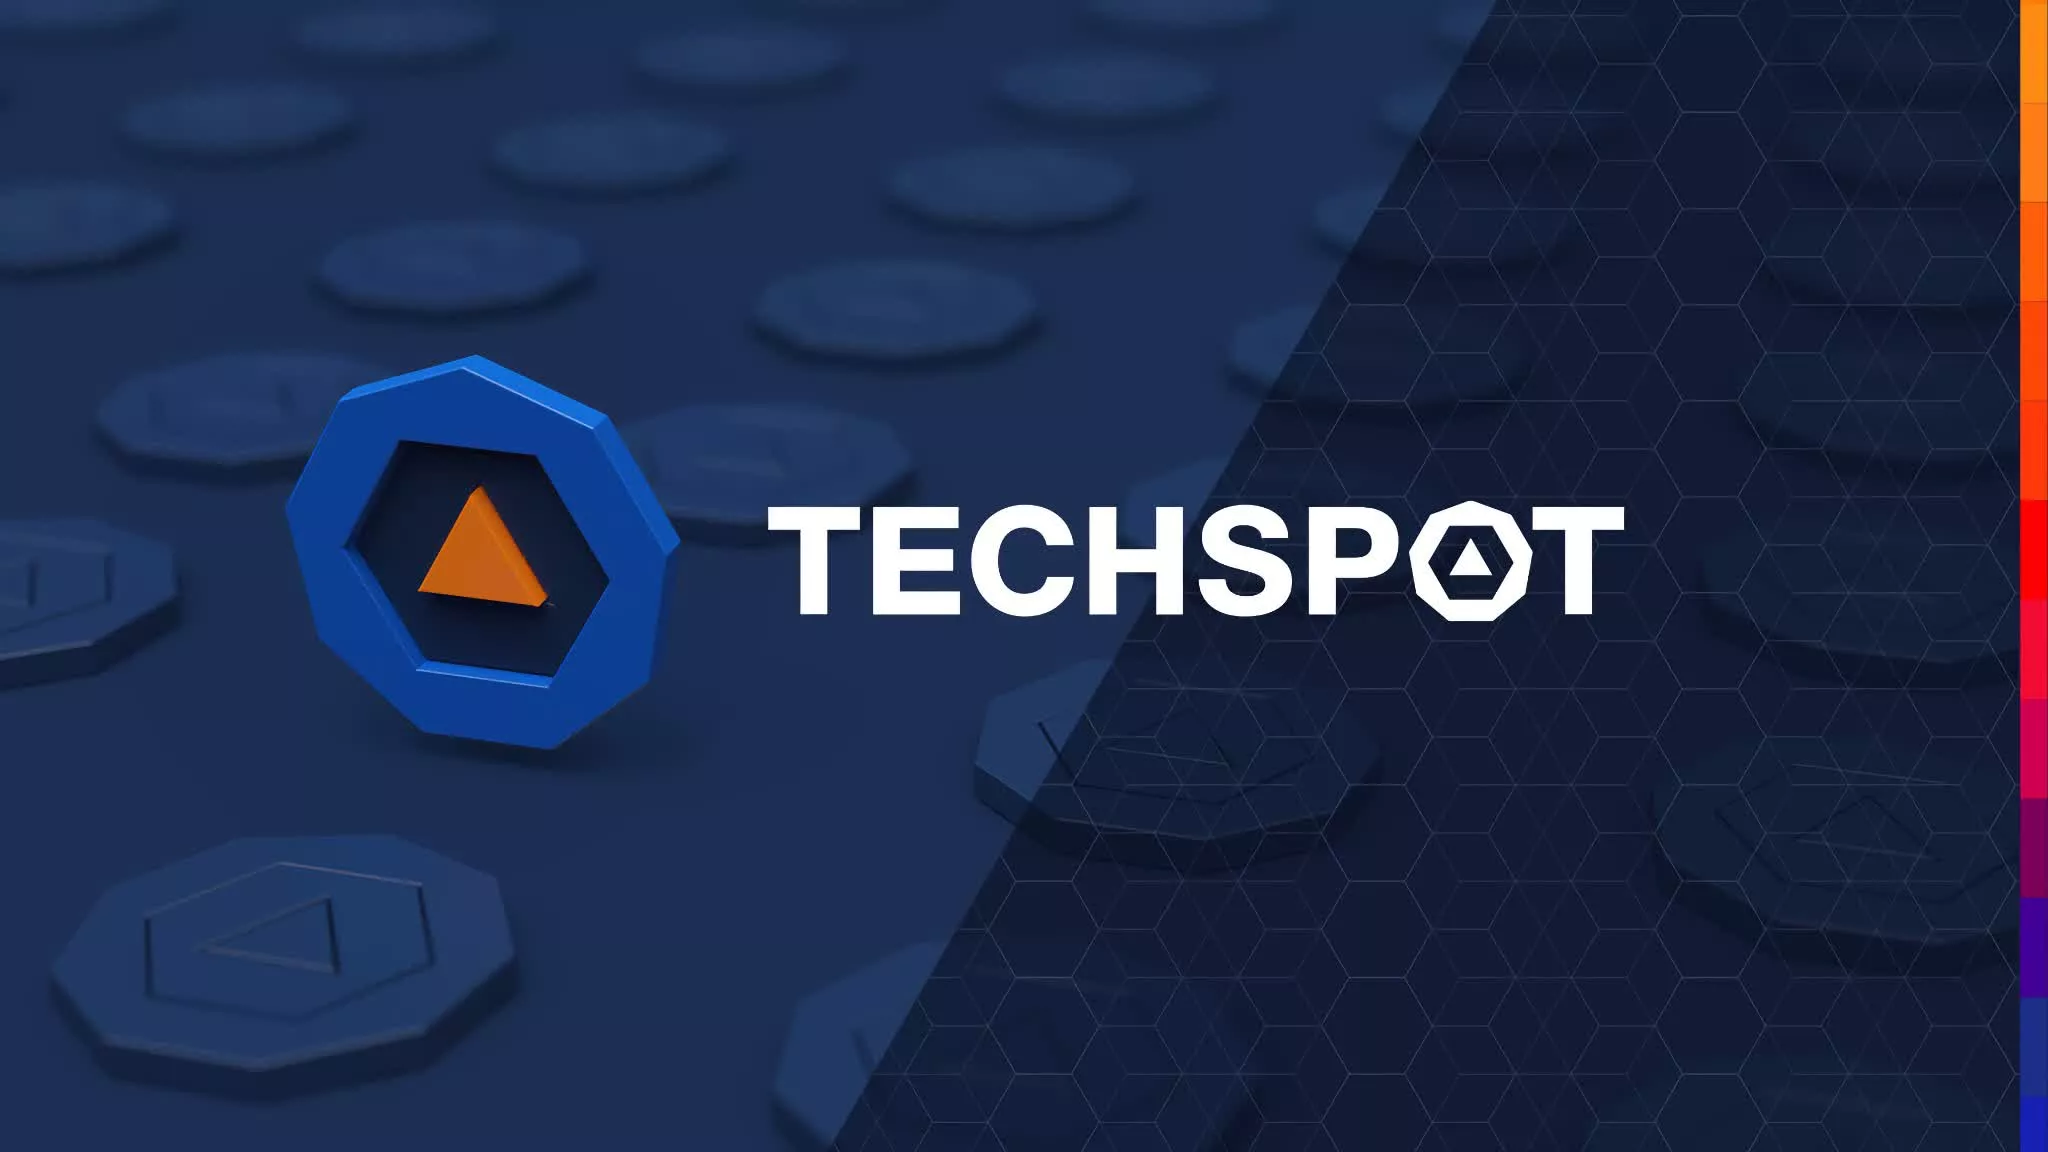 TechSpot is hiring: We're looking for tech enthusiasts with sharp writing skills